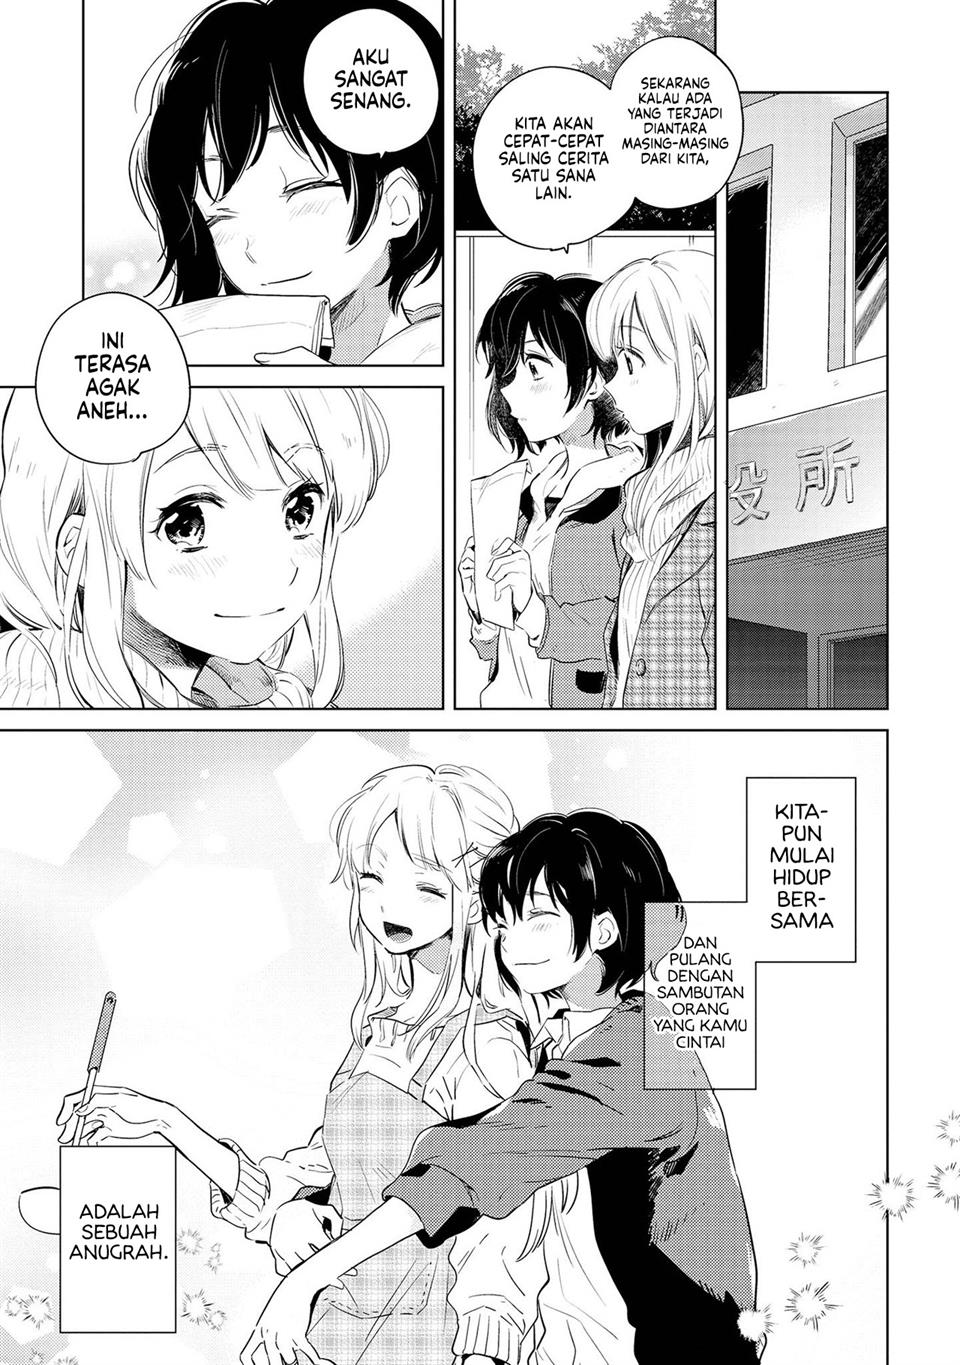 White Lilies in Love BRIDE’s Newlywed Yuri Anthology Chapter 6